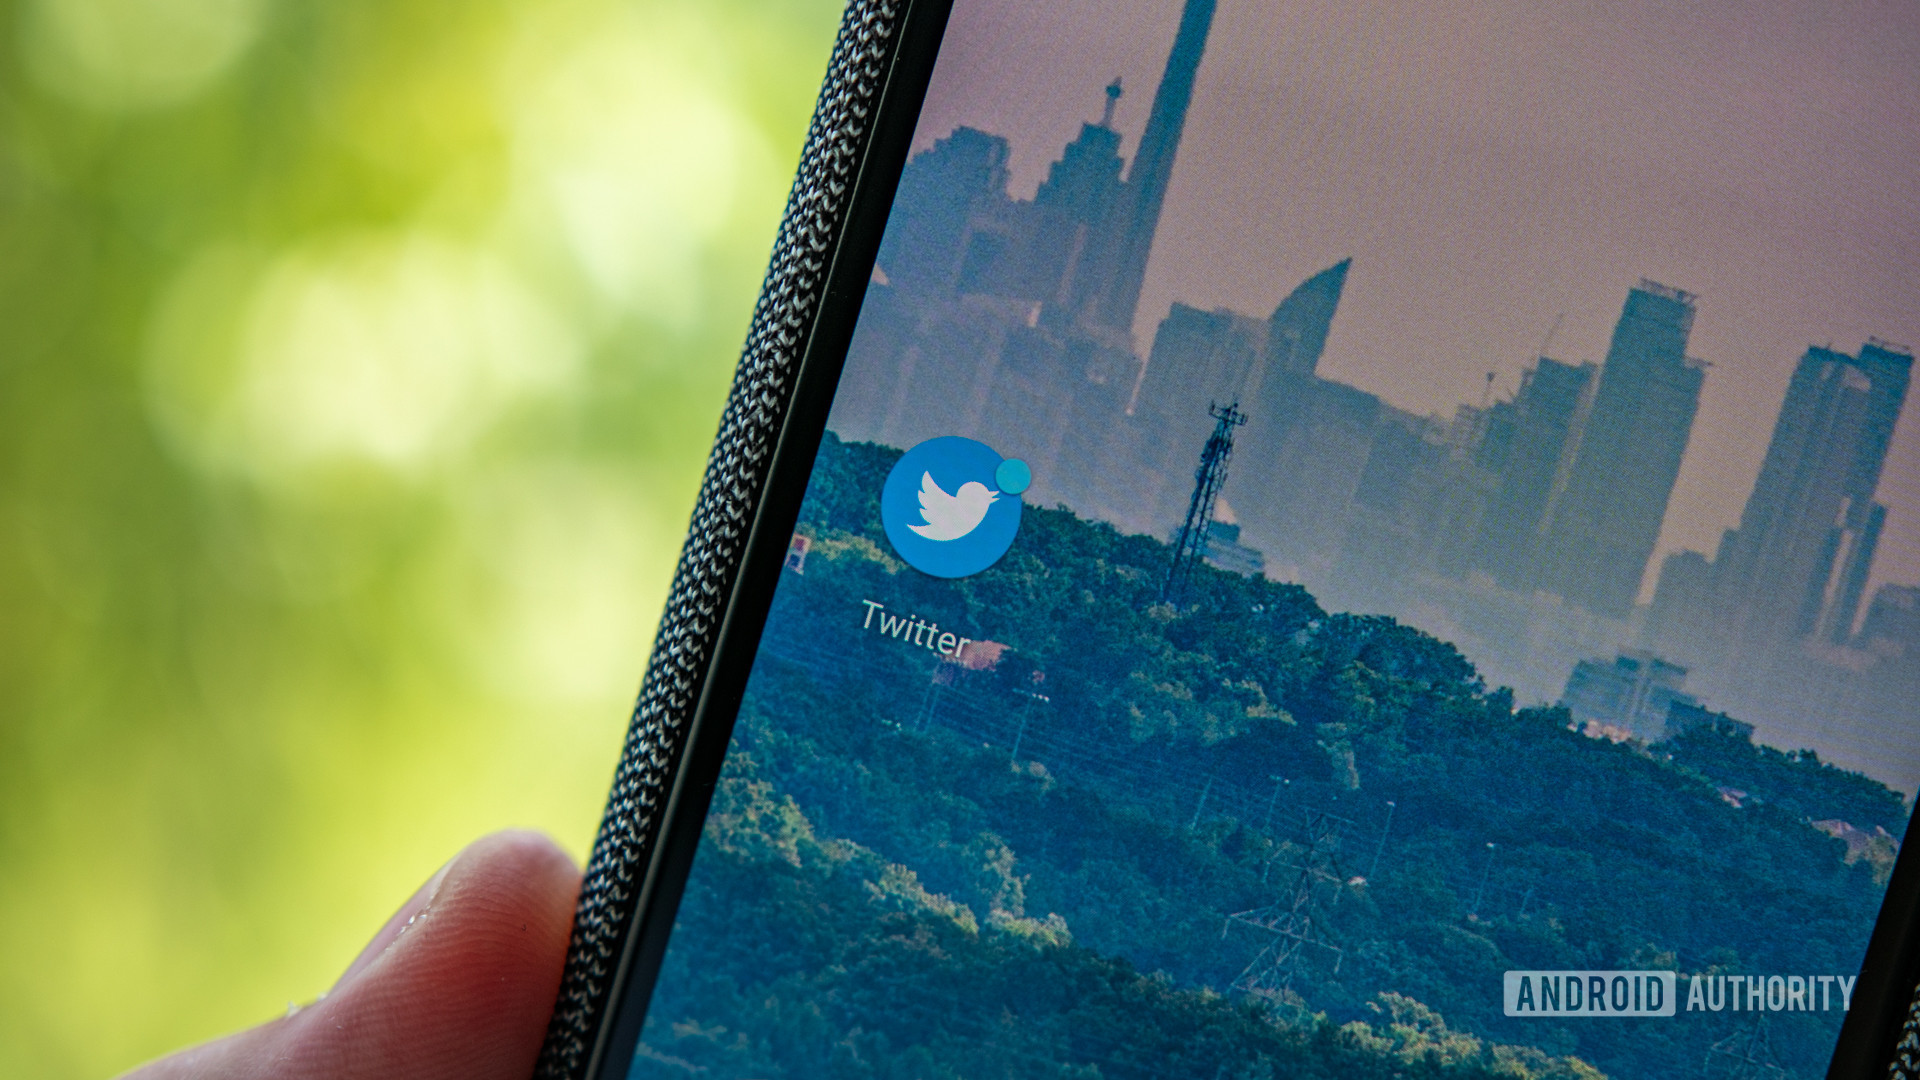 Twitter for 爱游戏刷手机版下载Android应用程序图标标志